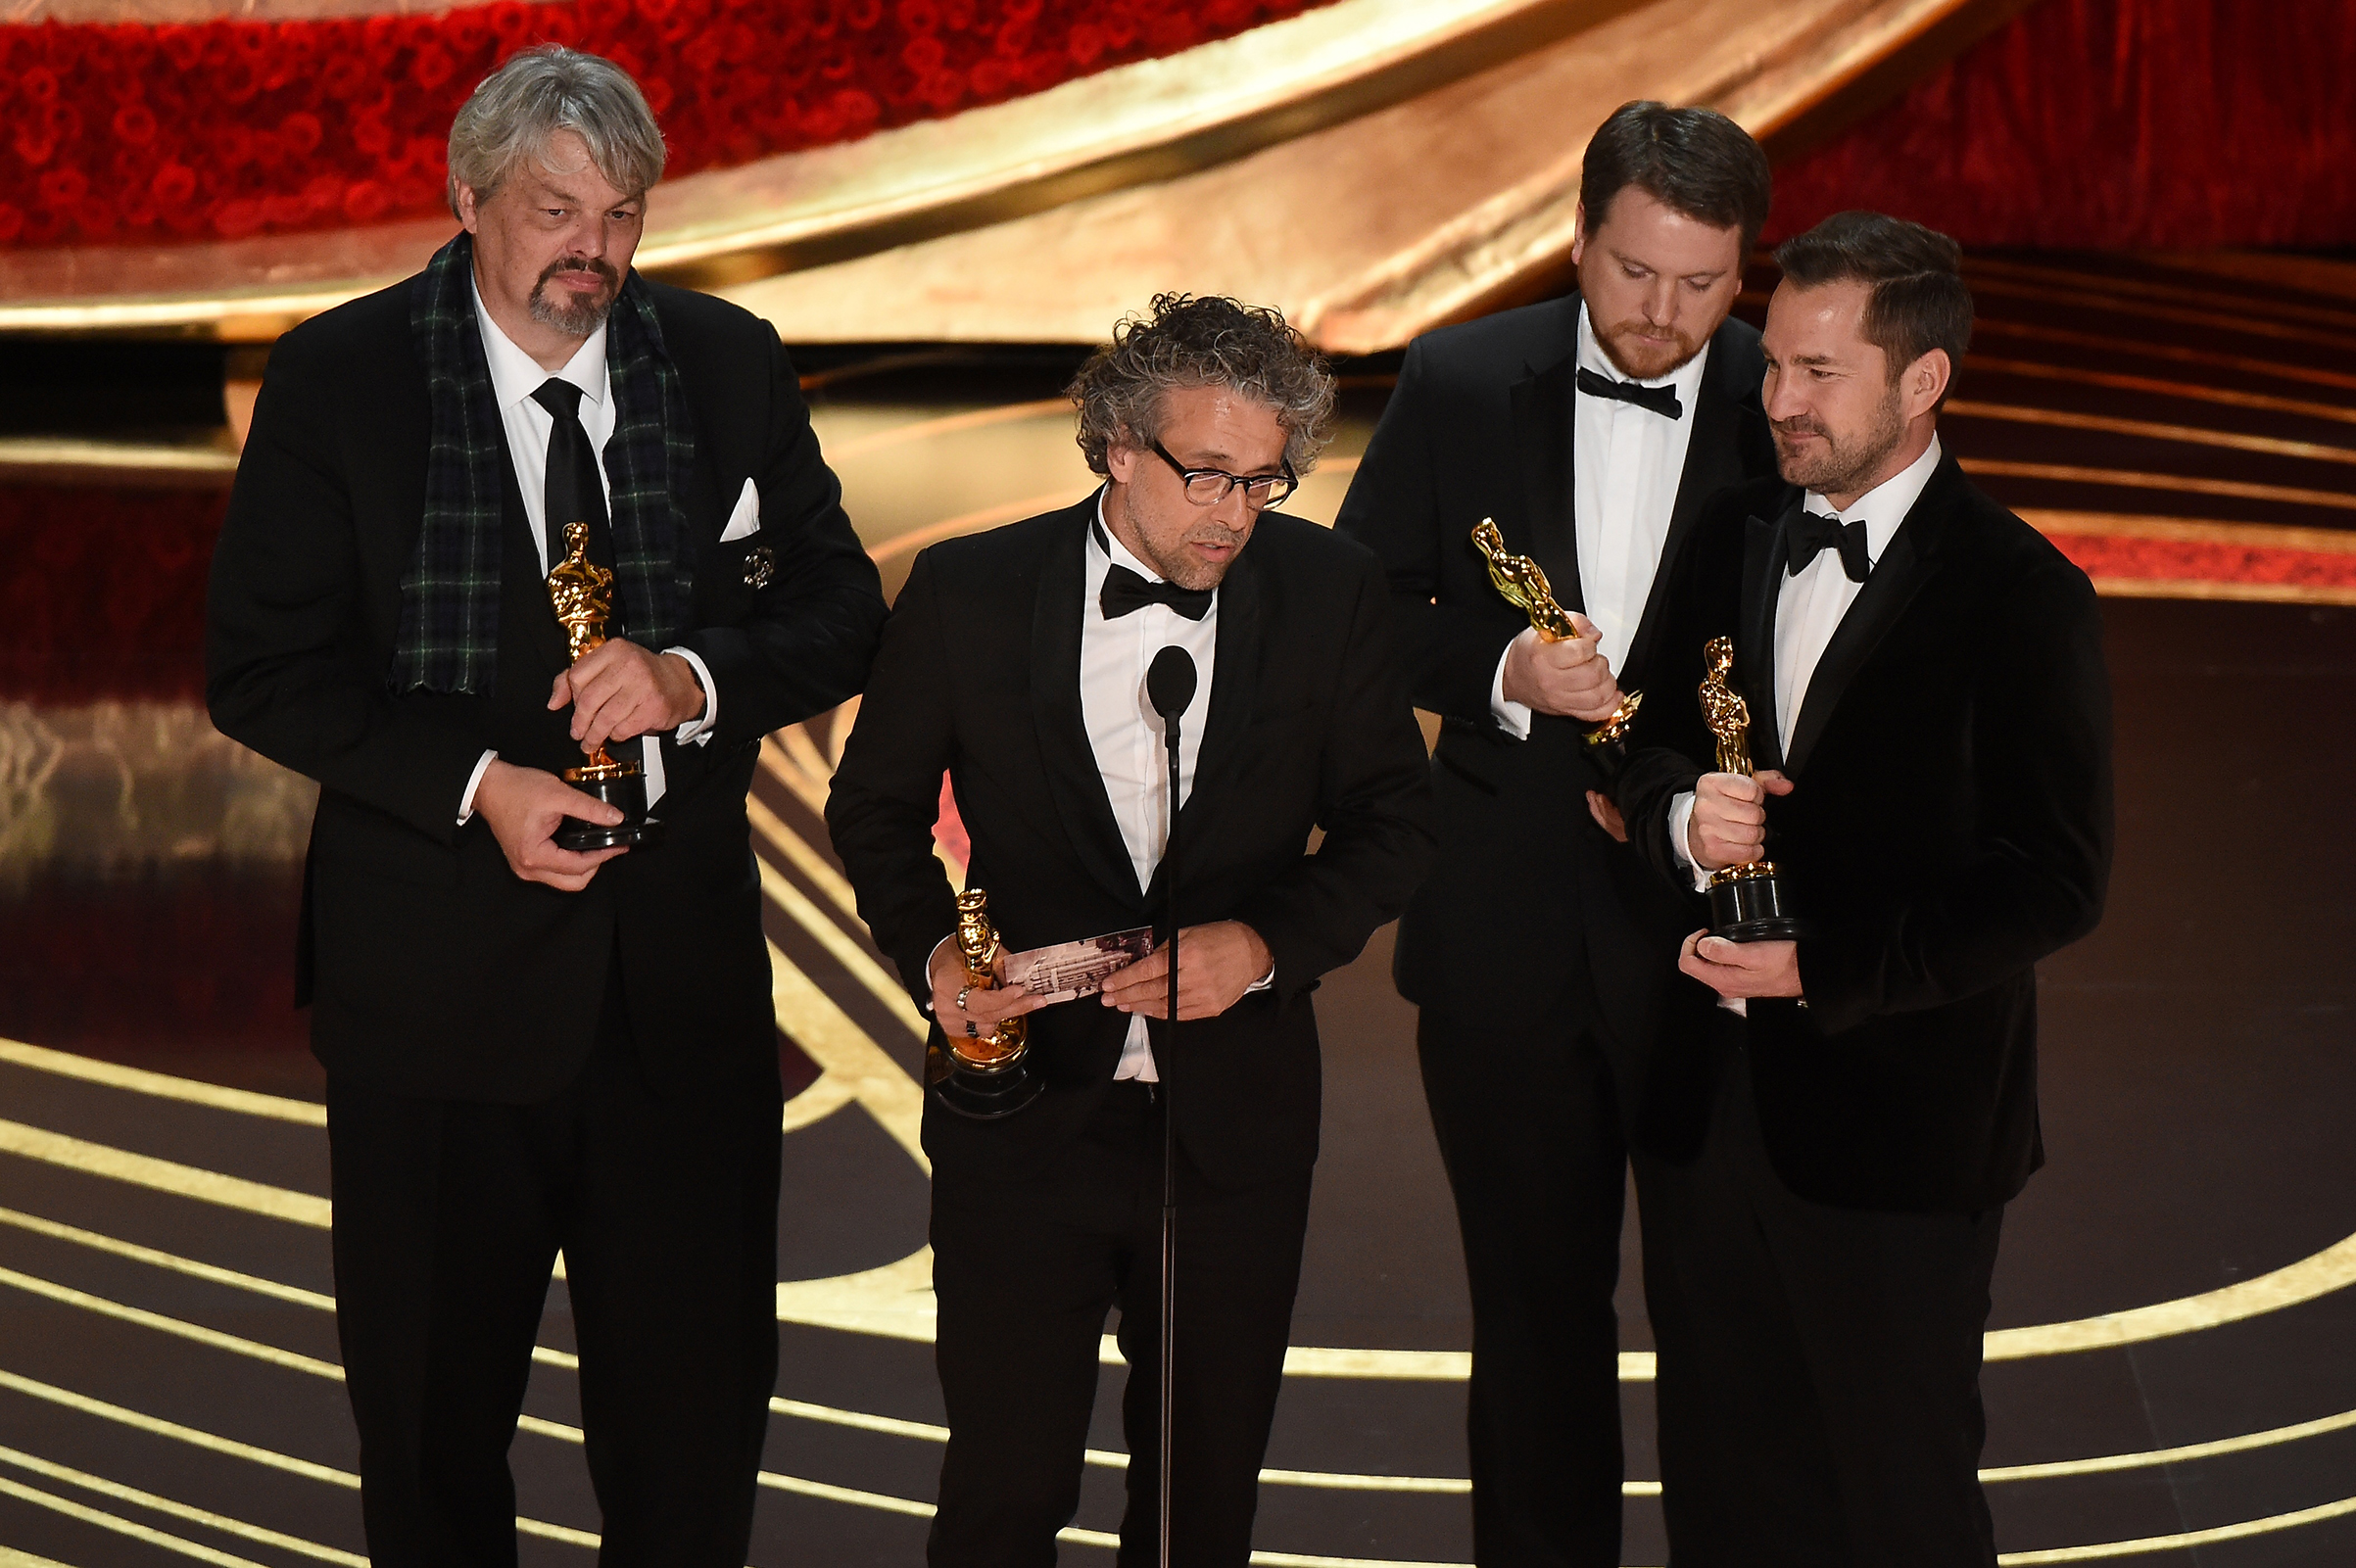 Best Visual Effects nominees for "First Man" Paul Lambert, Ian Hunter, Tristan Myles and J.D. Schwalm accept the award for Best Visual Effects during the 91st Annual Academy Awards at the Dolby Theatre in Hollywood, California on Feb. 24, 2019. (Valerie Macon—AFP/Getty Images)